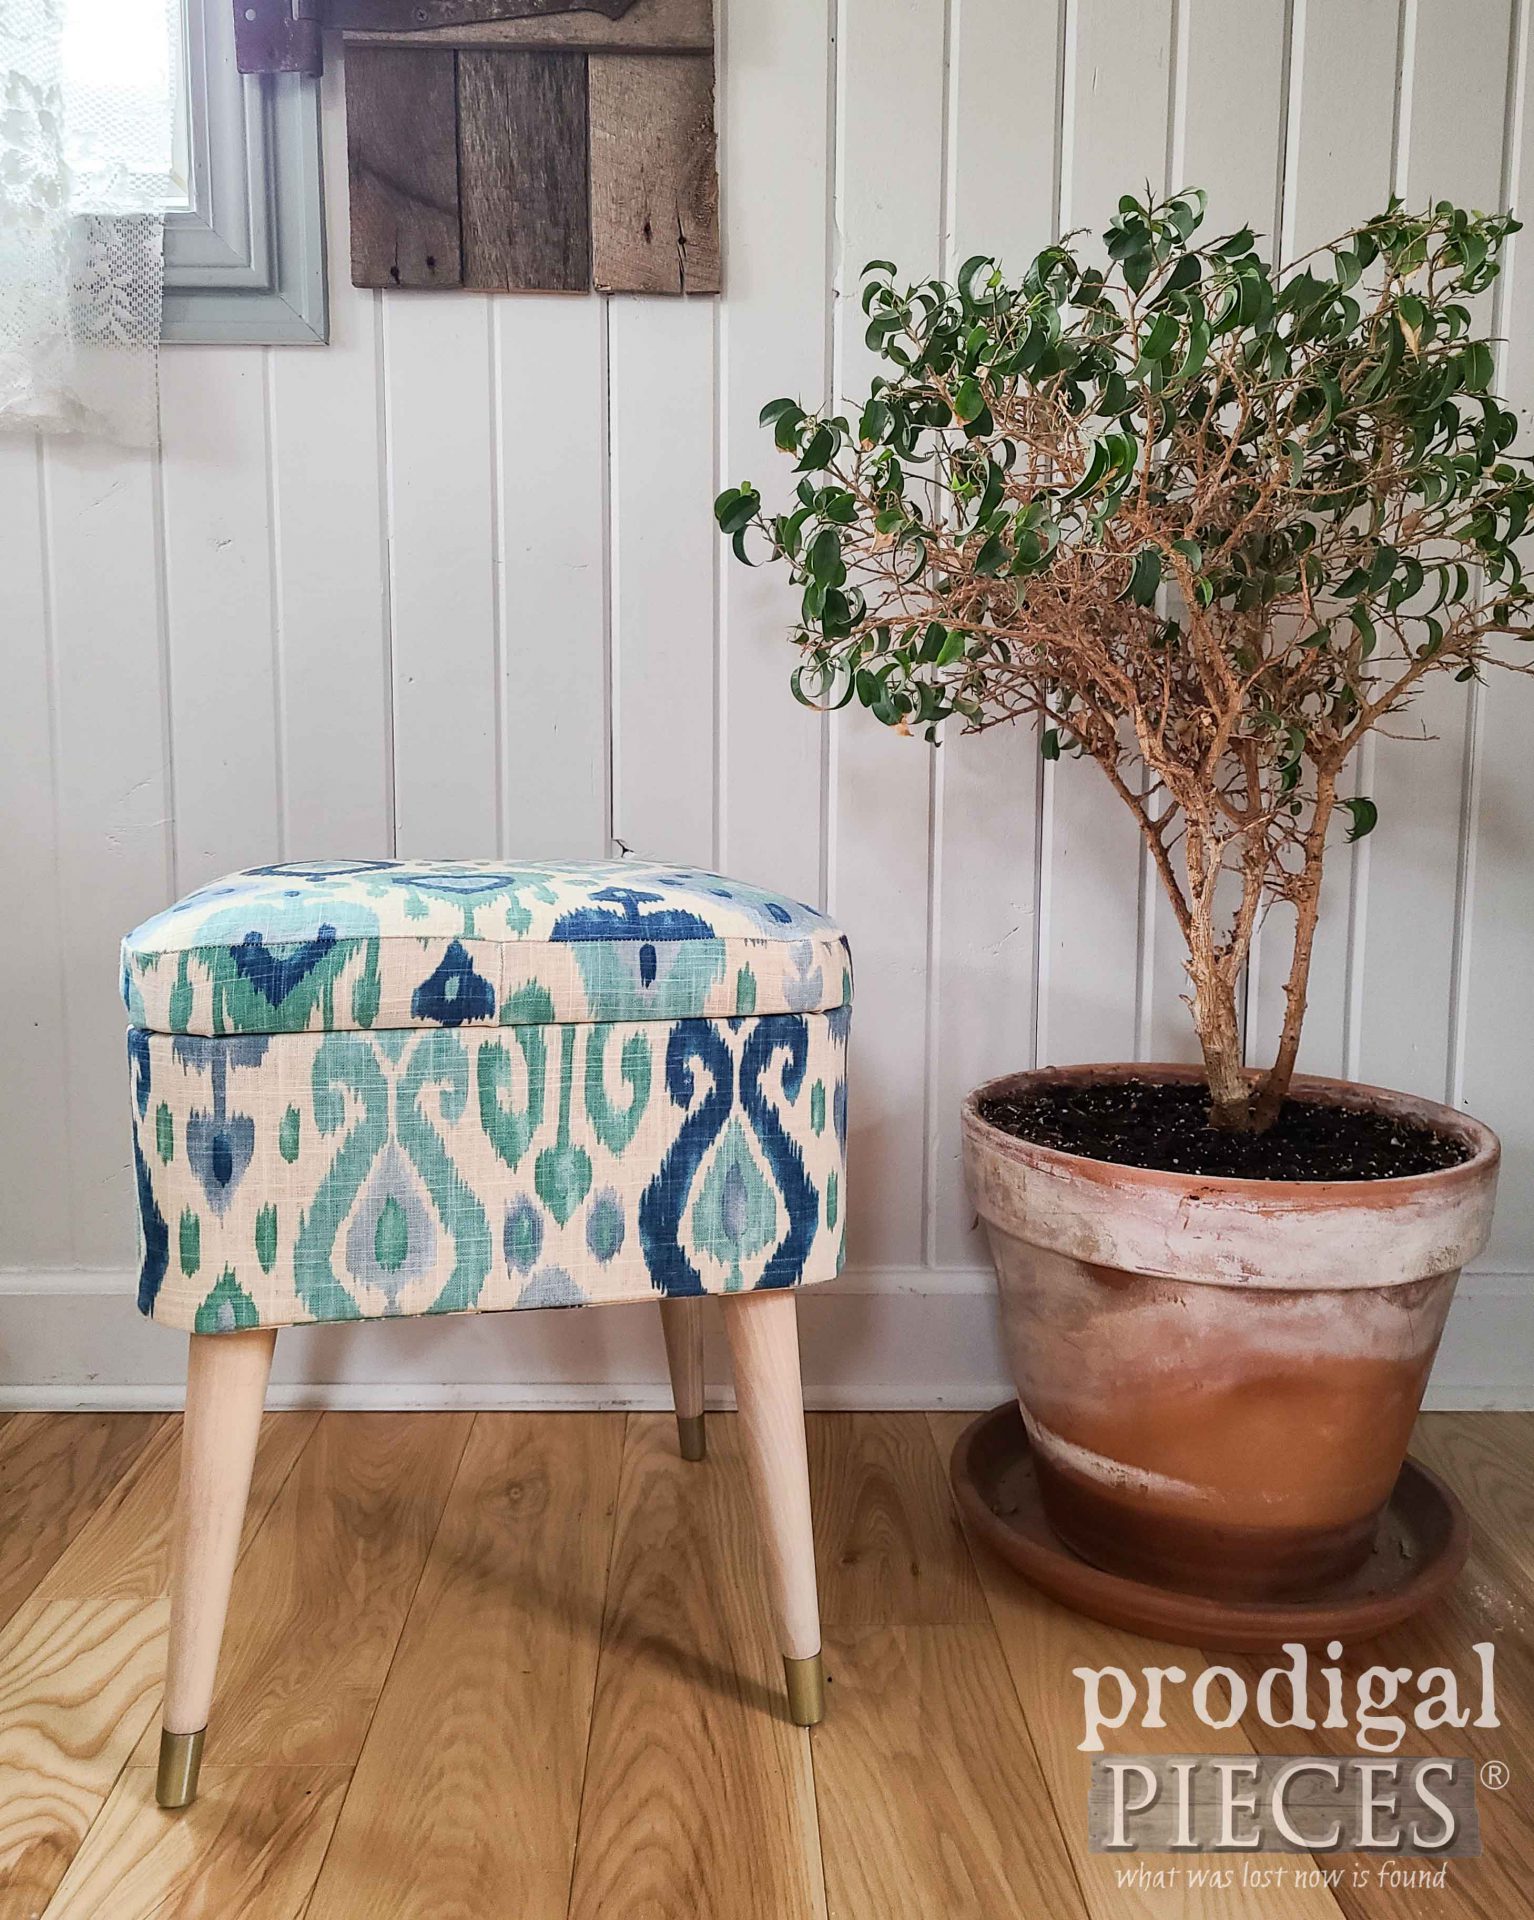 Vintage Sewing Stool with Ikat Upholstery by Larissa of Prodigal Pieces | prodigalpieces.com #prodigalpieces #vintage #midcentury #modern #sewing